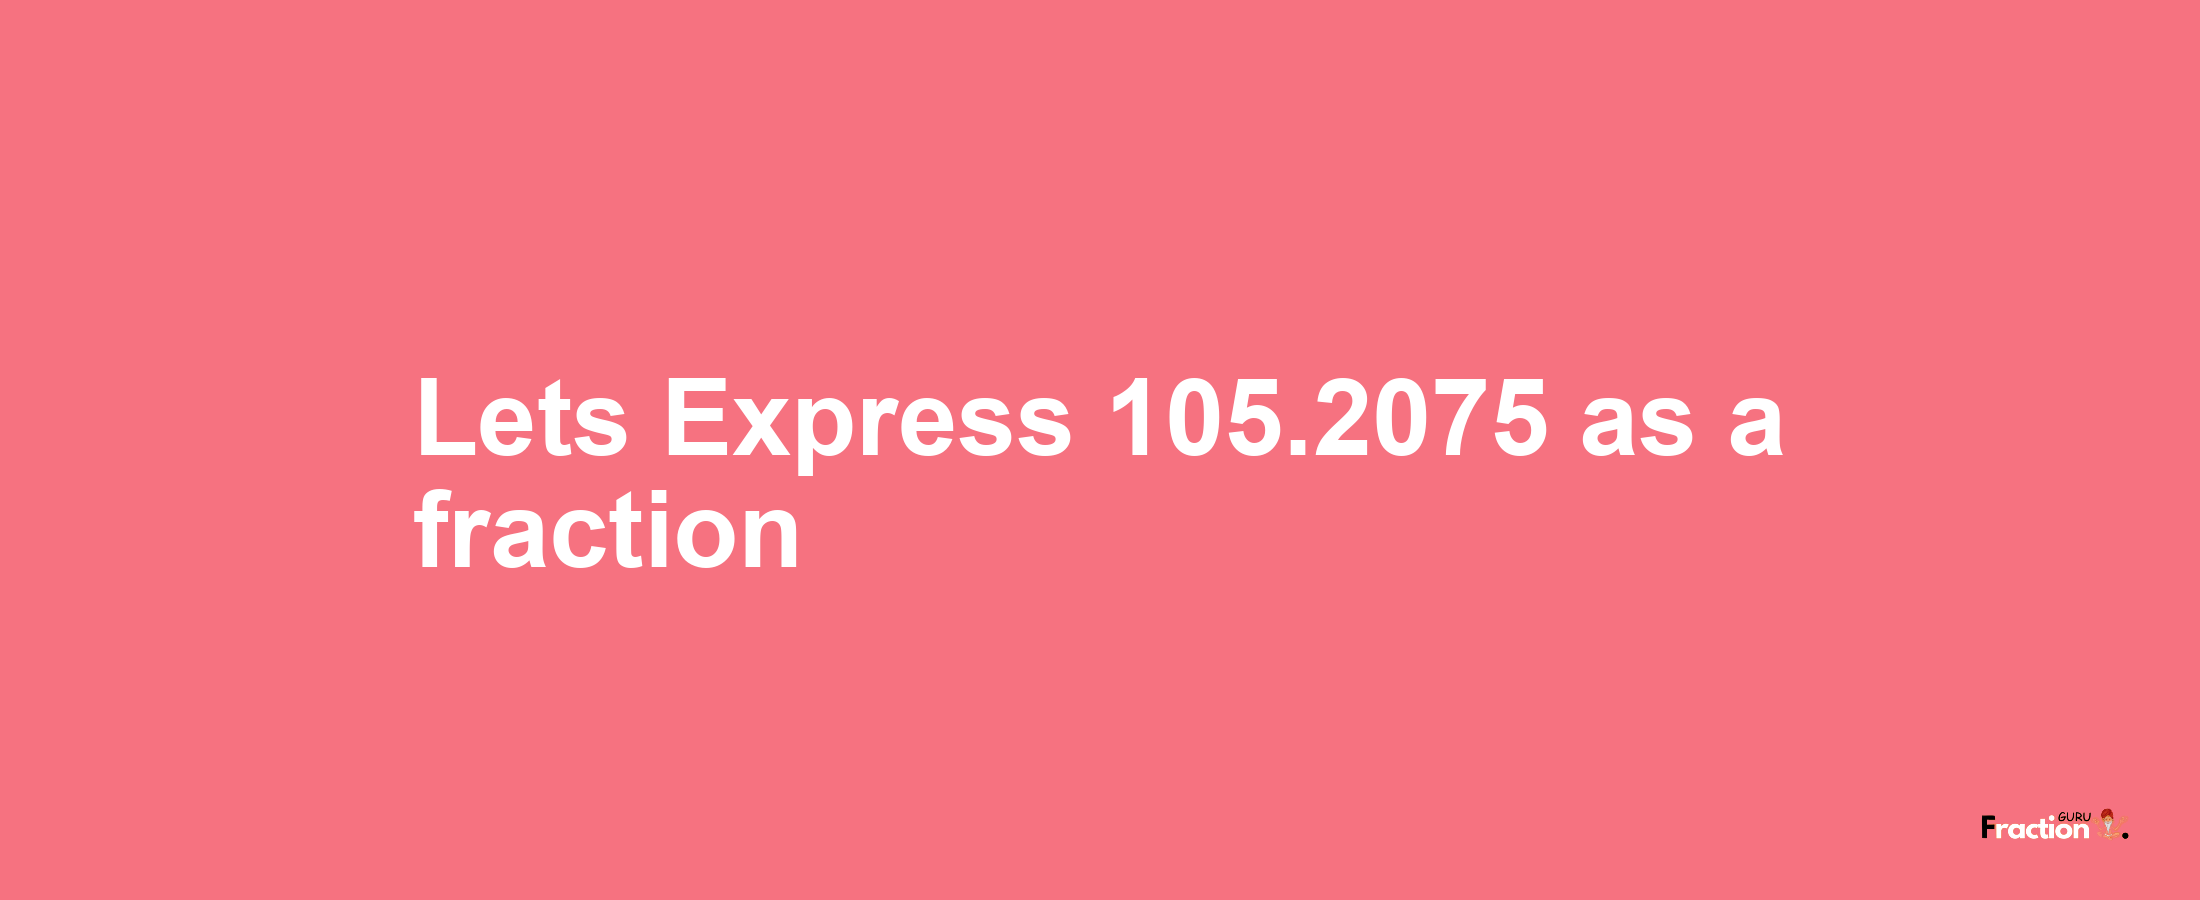 Lets Express 105.2075 as afraction